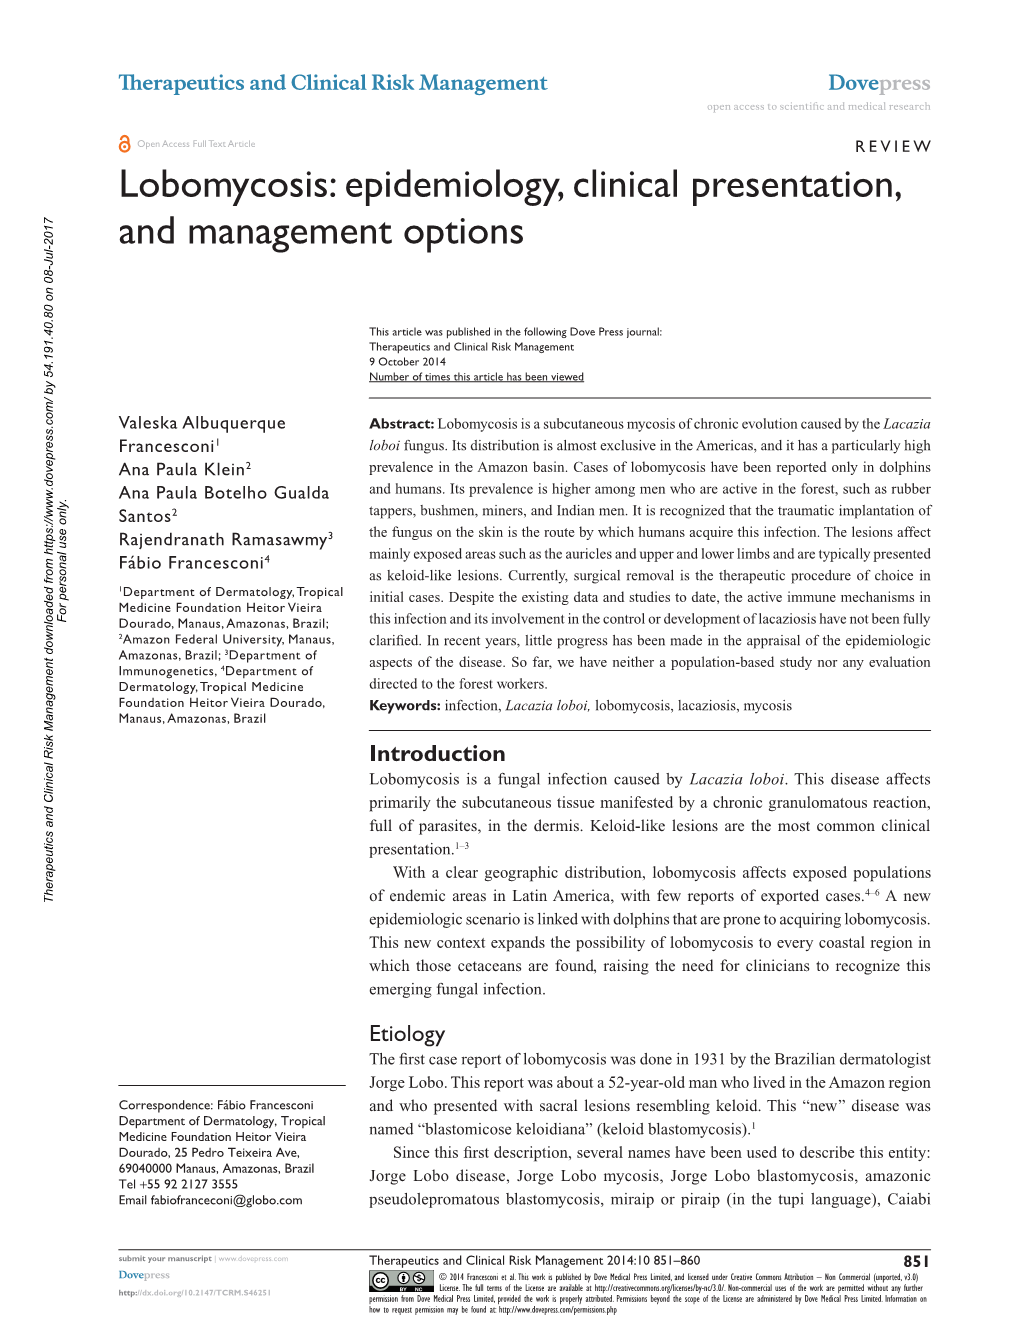 Lobomycosis: Epidemiology, Clinical Presentation, and Management Options